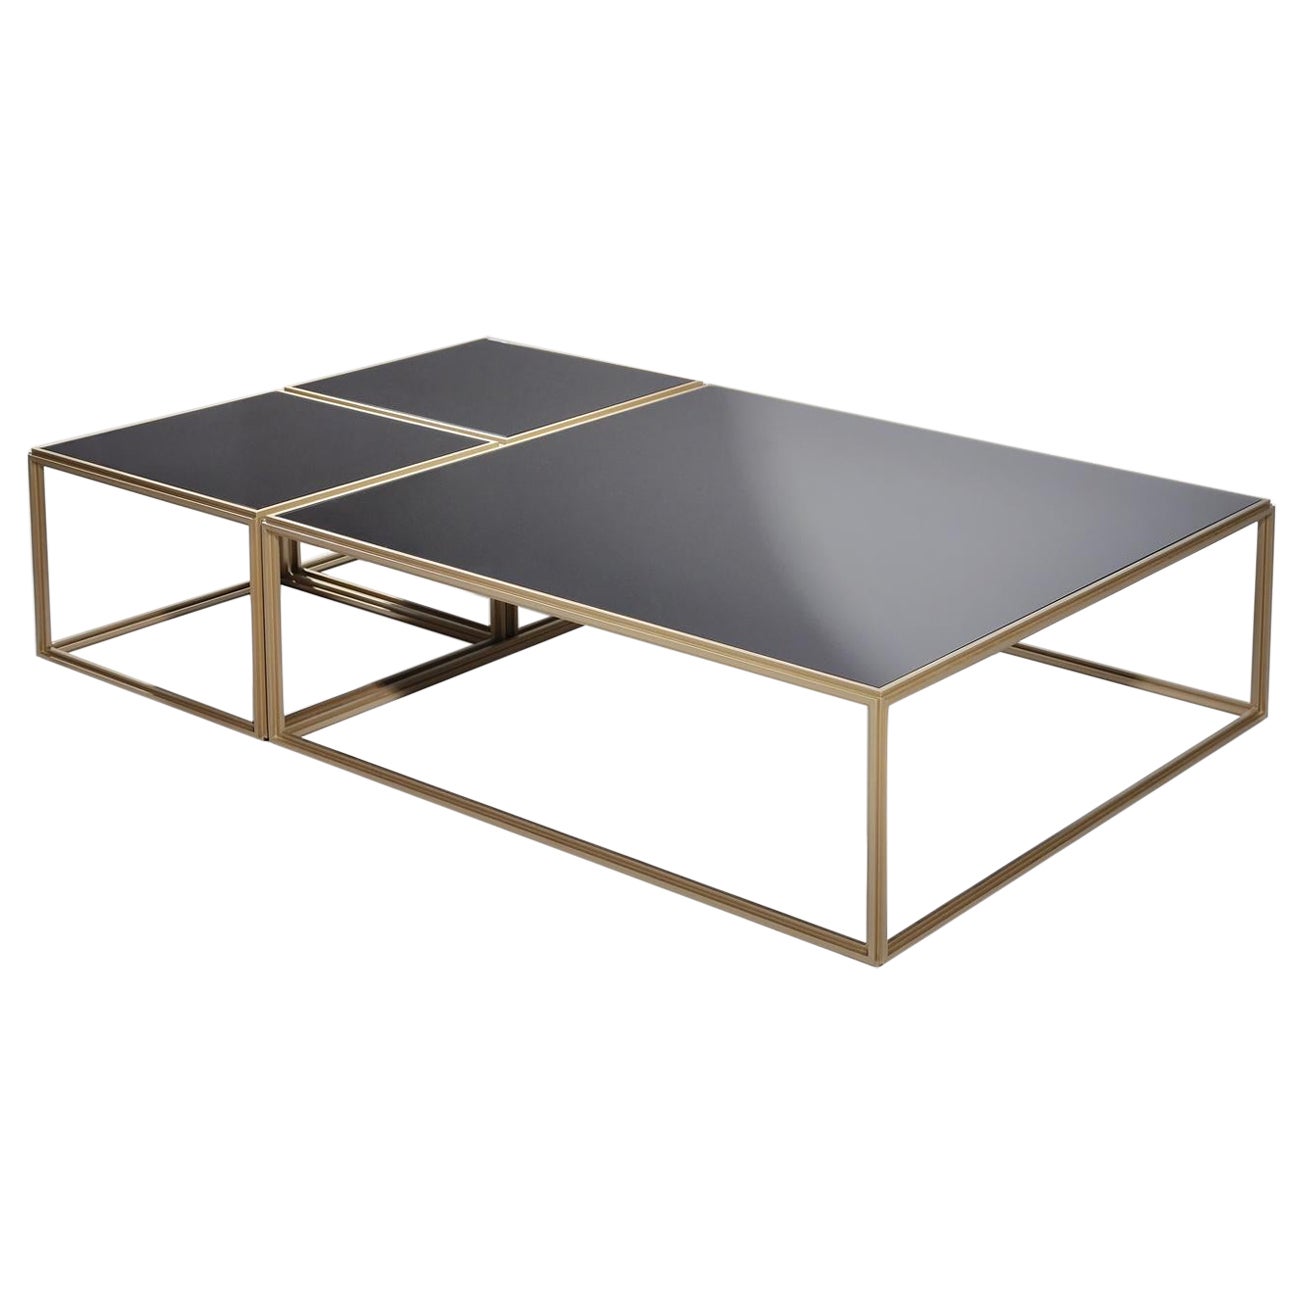 Customize Modular "Mondrian" Brass and Glass Low Table, by P. Tendercool